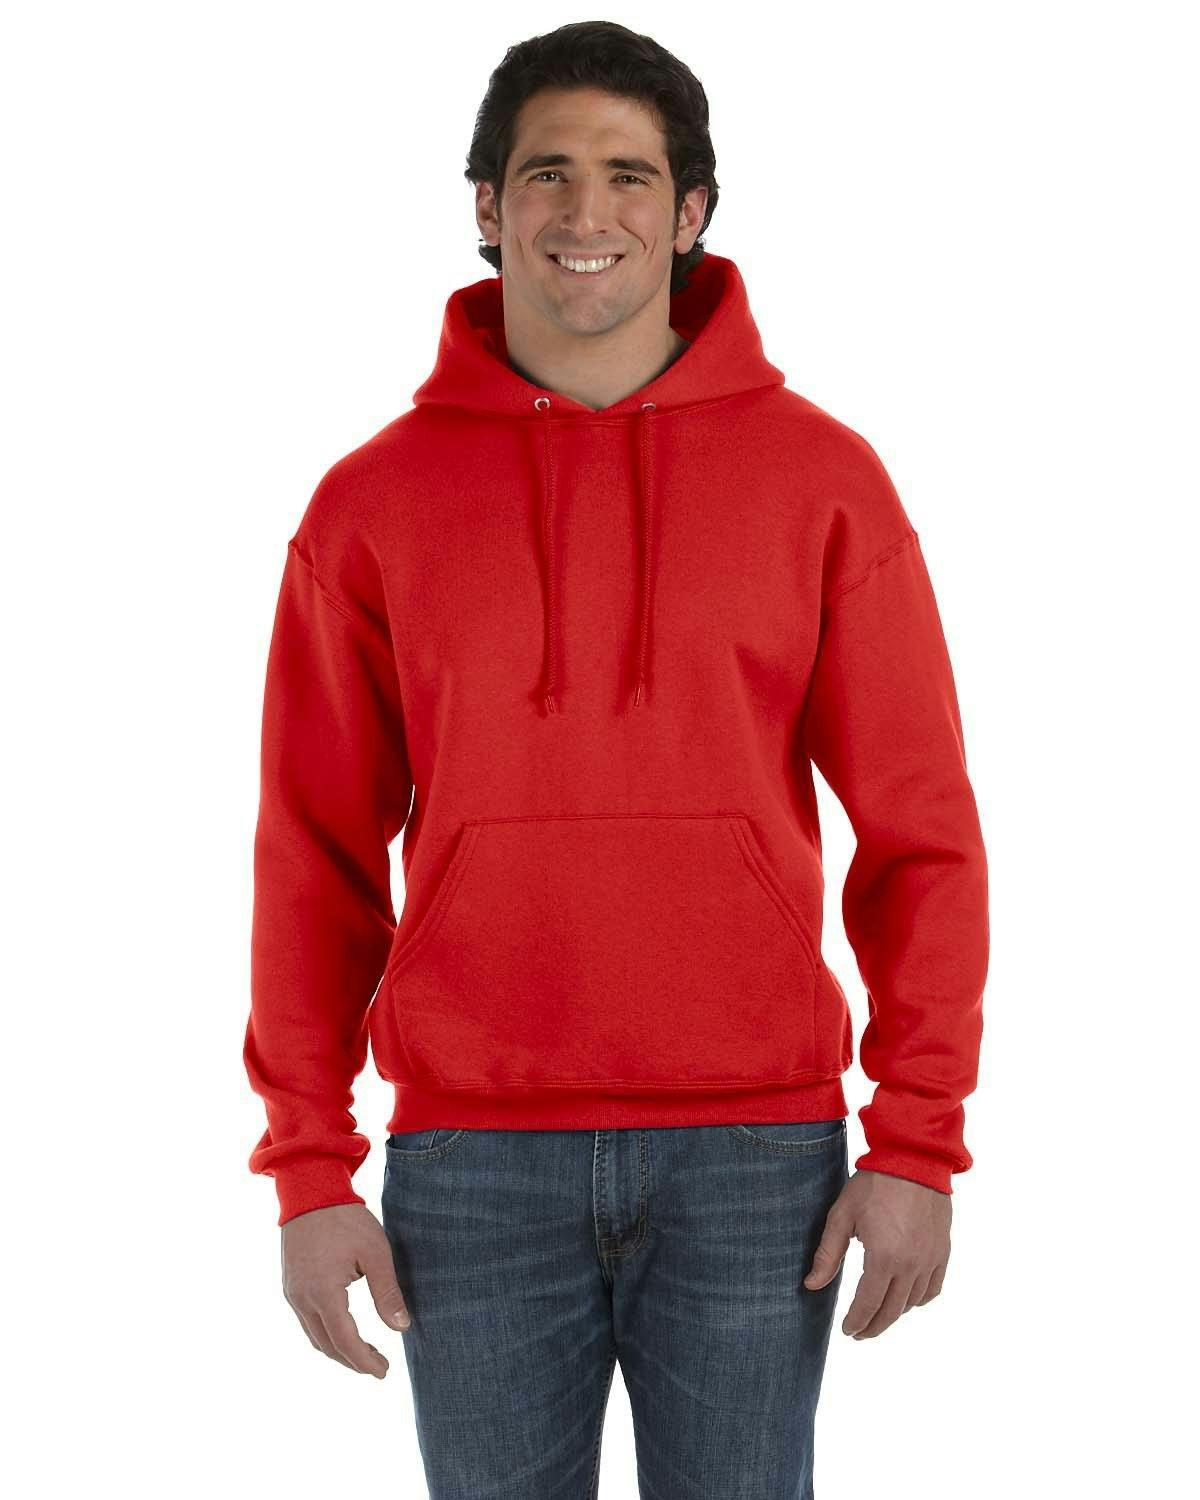 Image for Adult Supercotton™ Pullover Hooded Sweatshirt